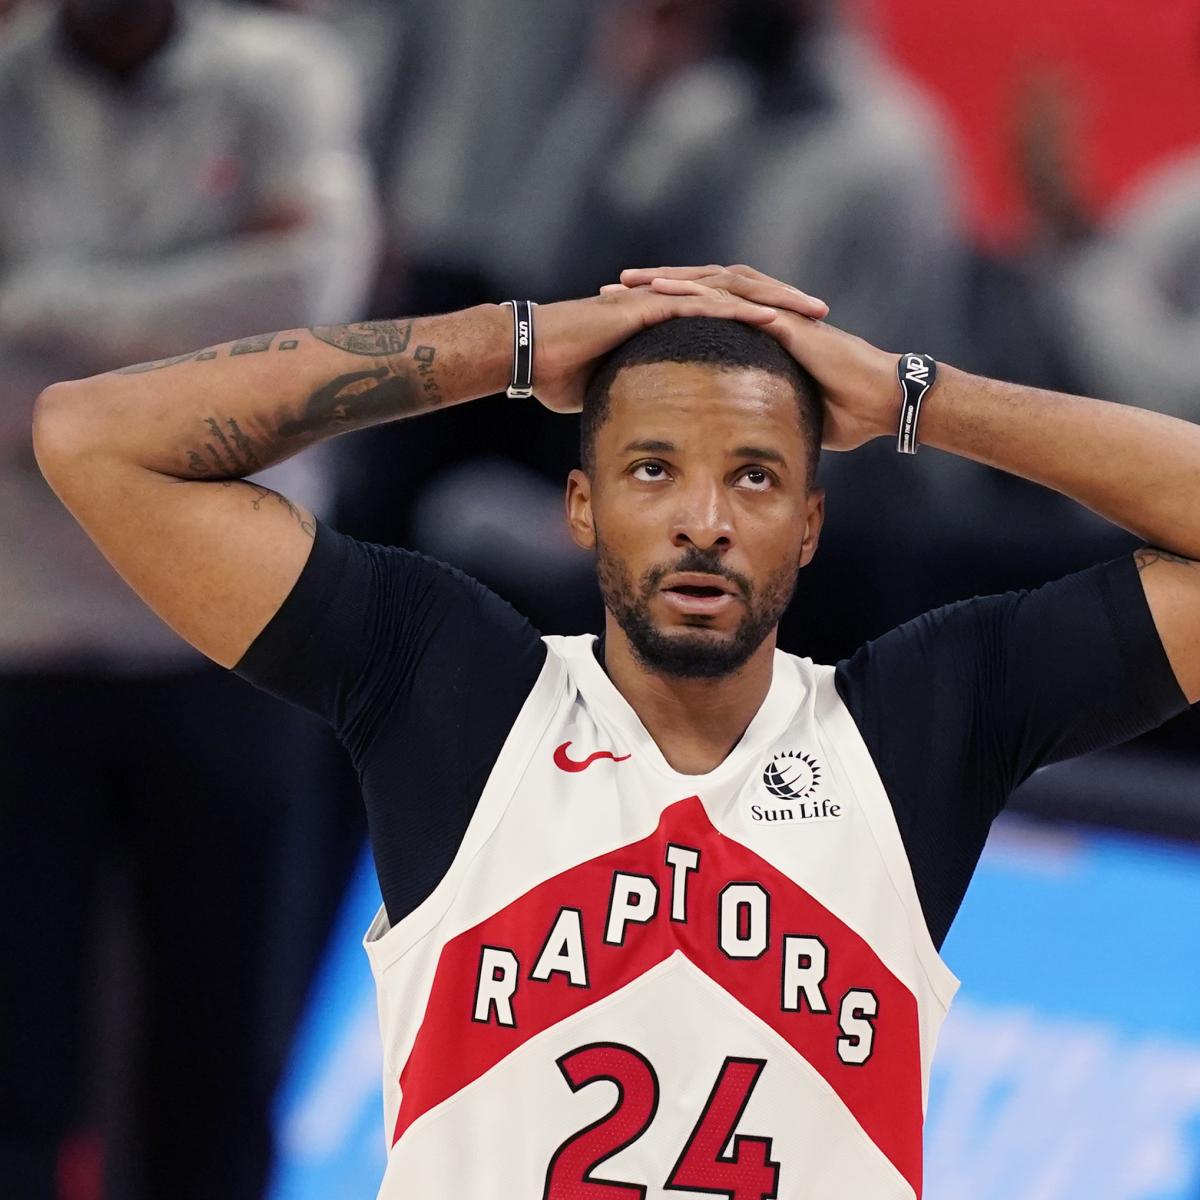 Report: Knicks Have 'Much More' Trade Interest in Norman Powell Than Kyle Lowry